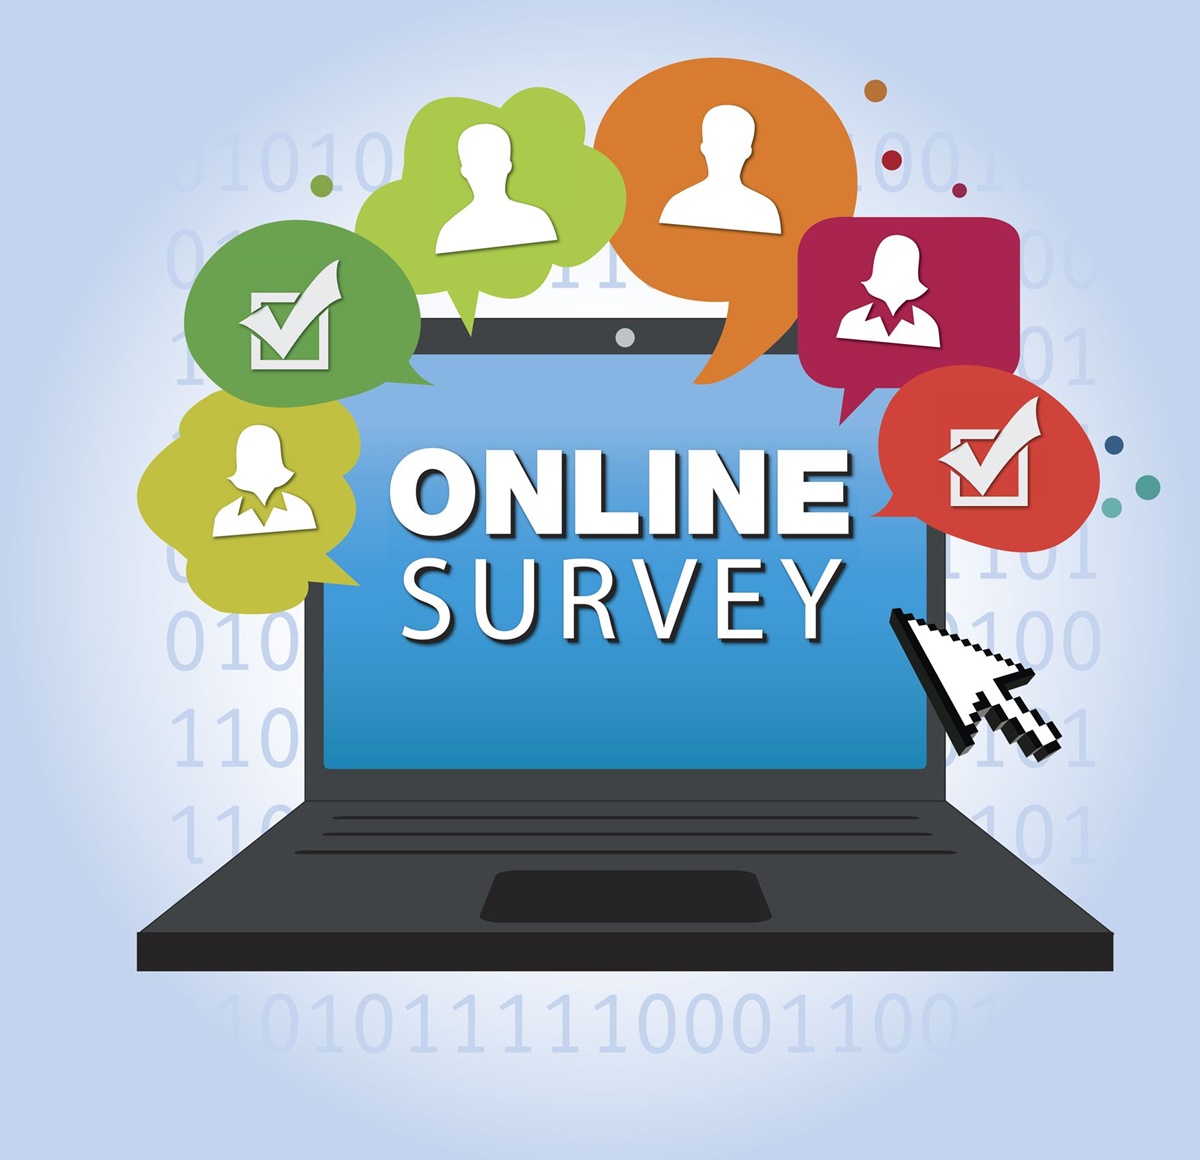 What is an online survey?